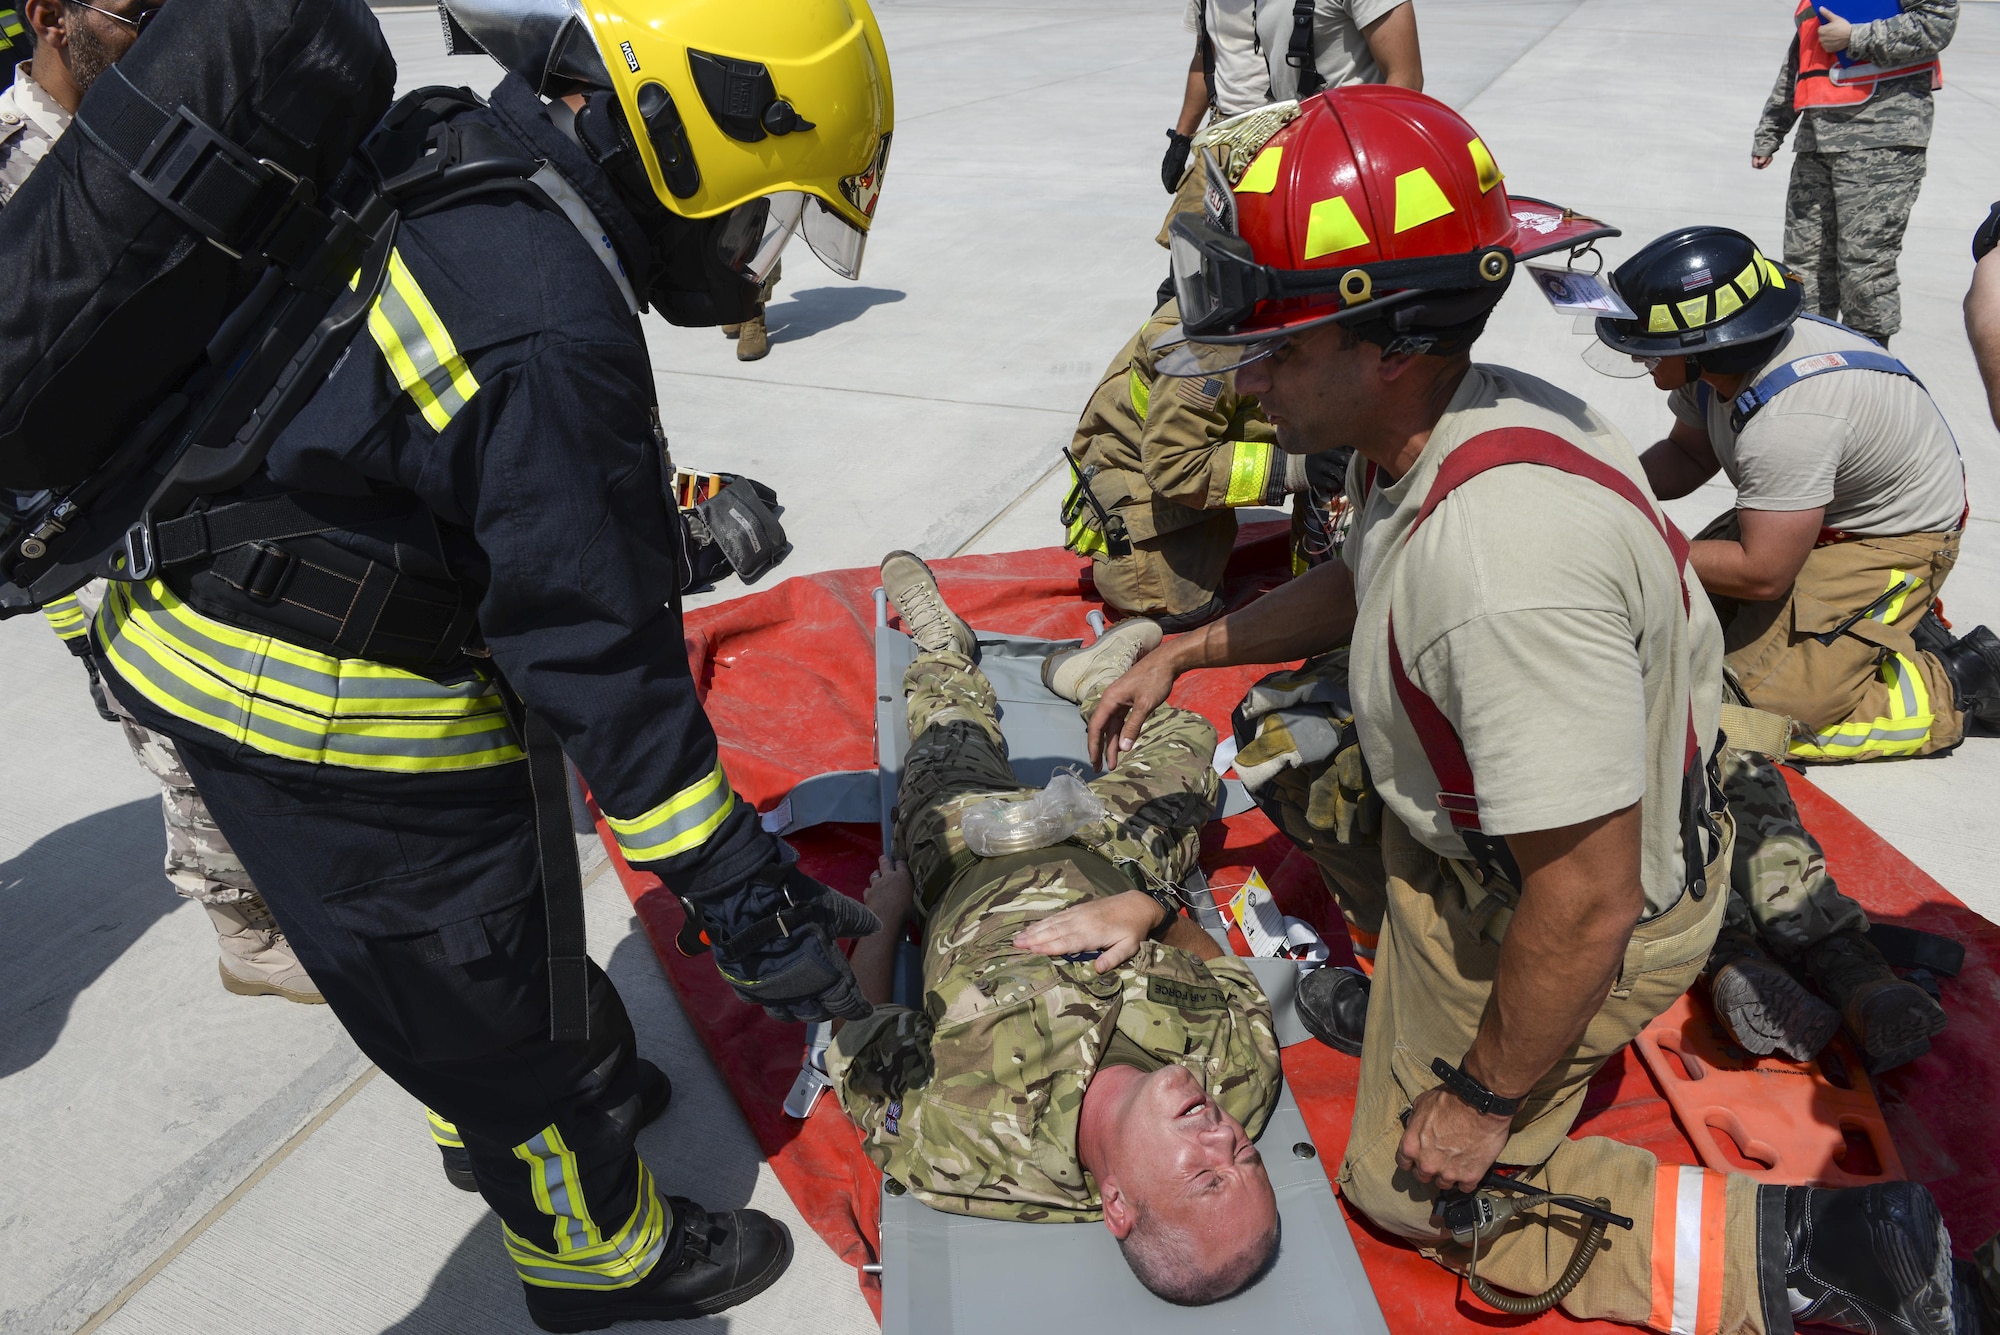 U.S. Air Force firefighters assigned to the 379th Expeditionary Civil Engineering Squadron, tan uniforms, work alongside a firefighter from the Qatar Emiri Air Force, black uniform, to assist Royal Air Force members, simulating casualties, at a staging location at Al Udeid Air Base, Qatar, Oct. 3, 2017.